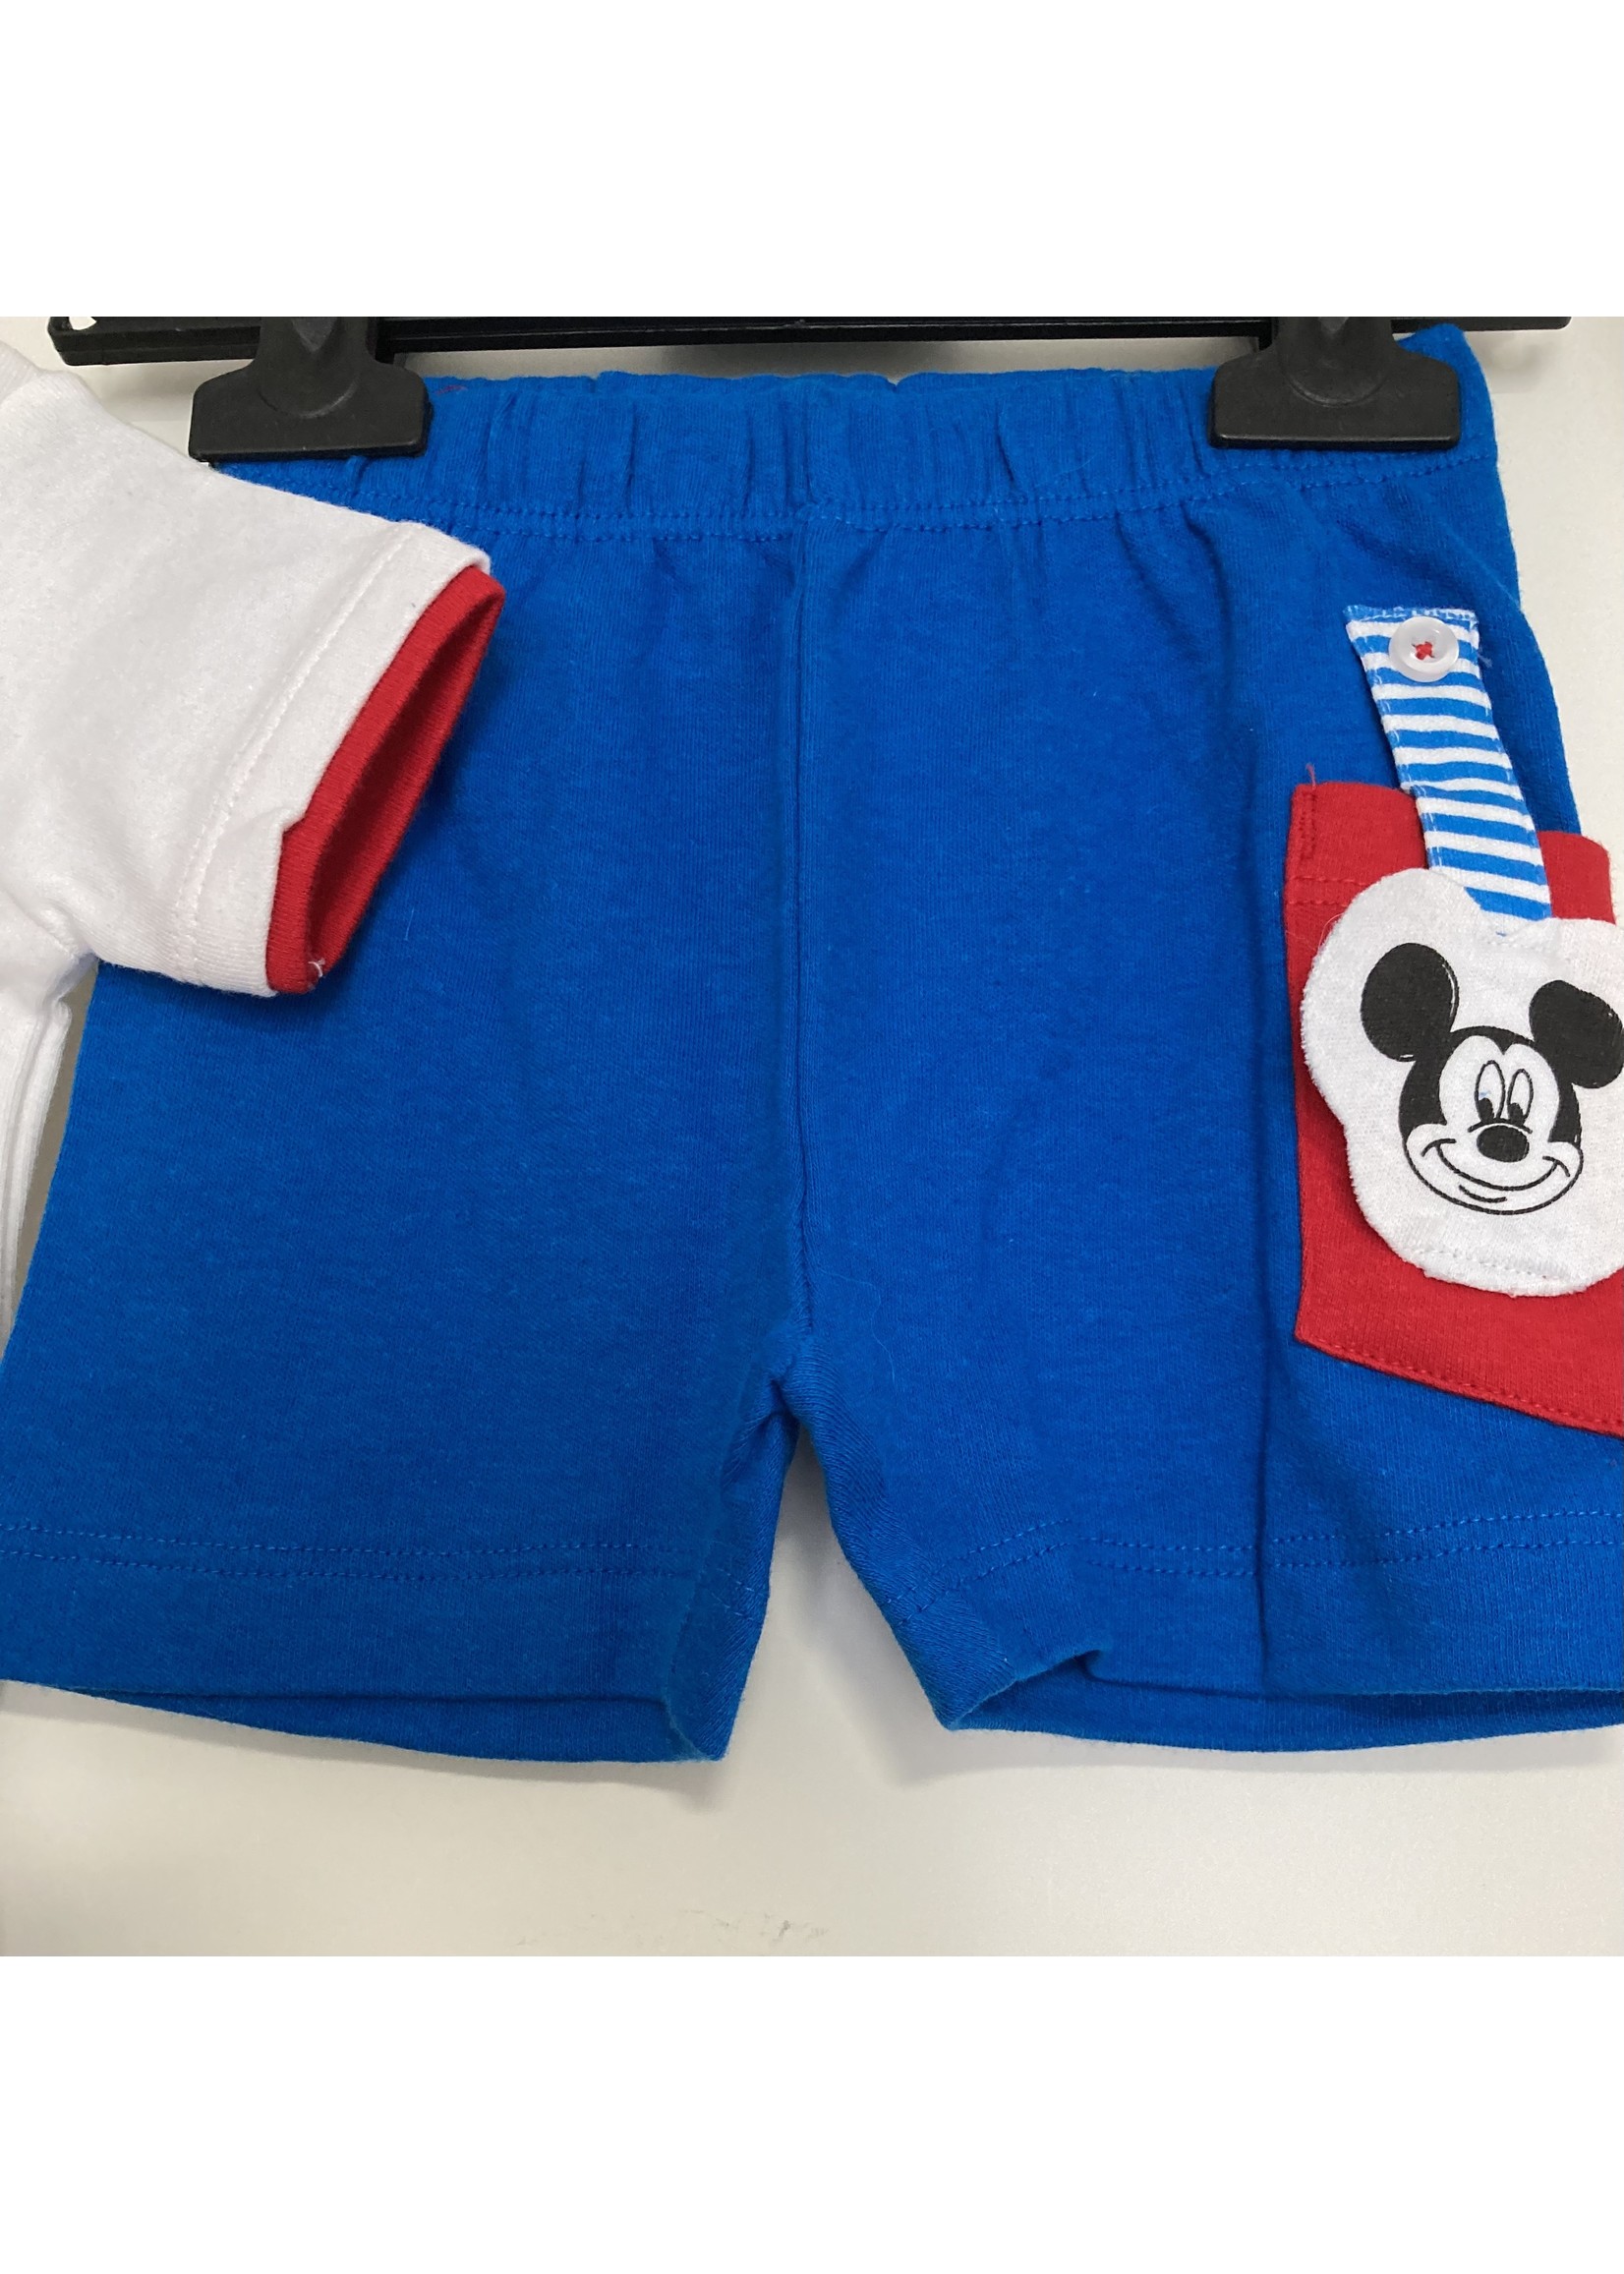 Disney baby Mickey Mouse summer set from Disney baby blue